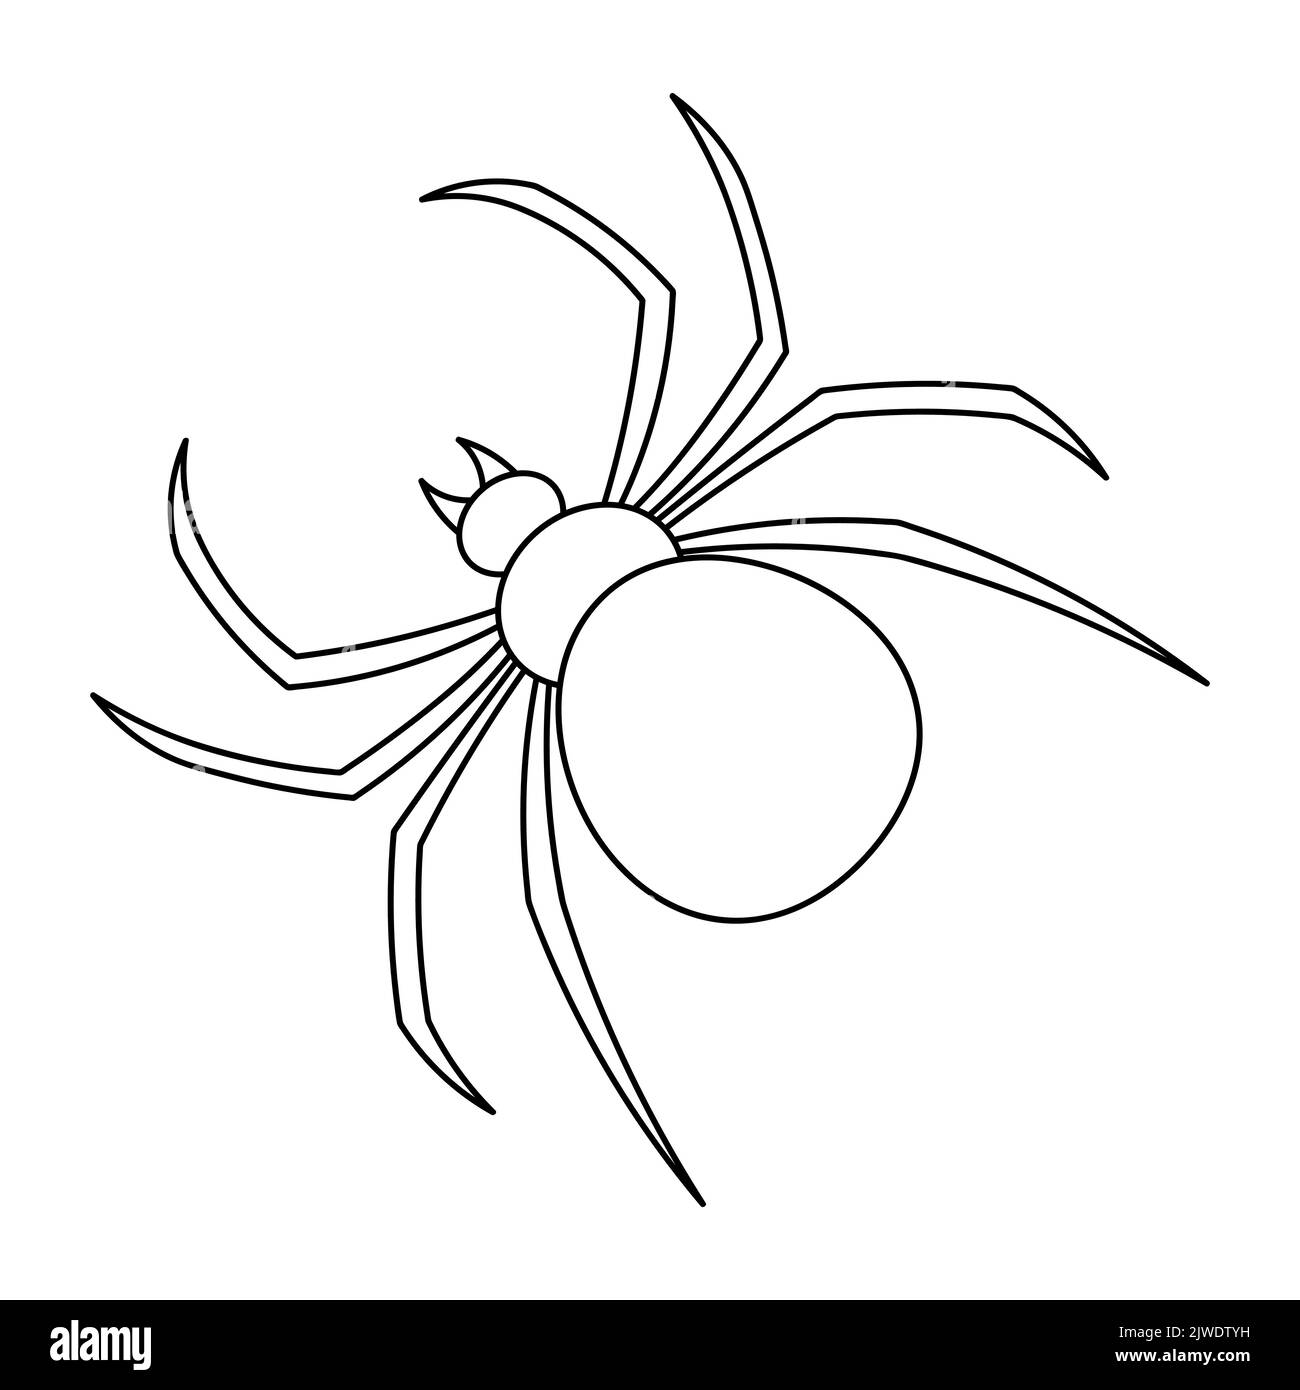 Spider.  Sketch. Bloodthirsty predator. Black Widow. Halloween symbol. A clever hunter. Vector illustration. Outline on an isolated white background. Stock Vector